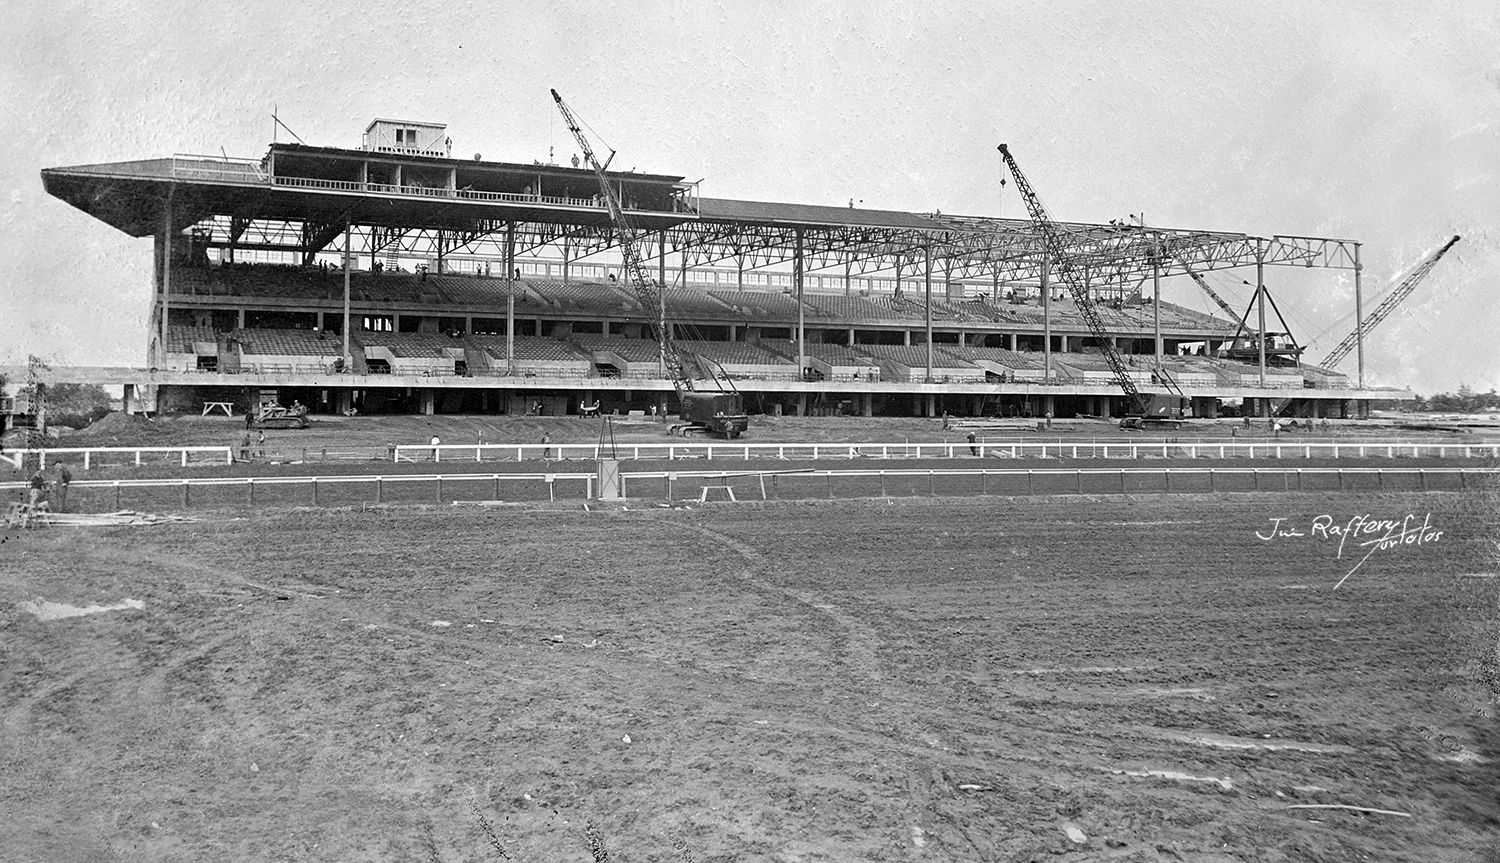 Monmouth Park during its construction, June 15, 1946 (Jim Raftery Turfotos)